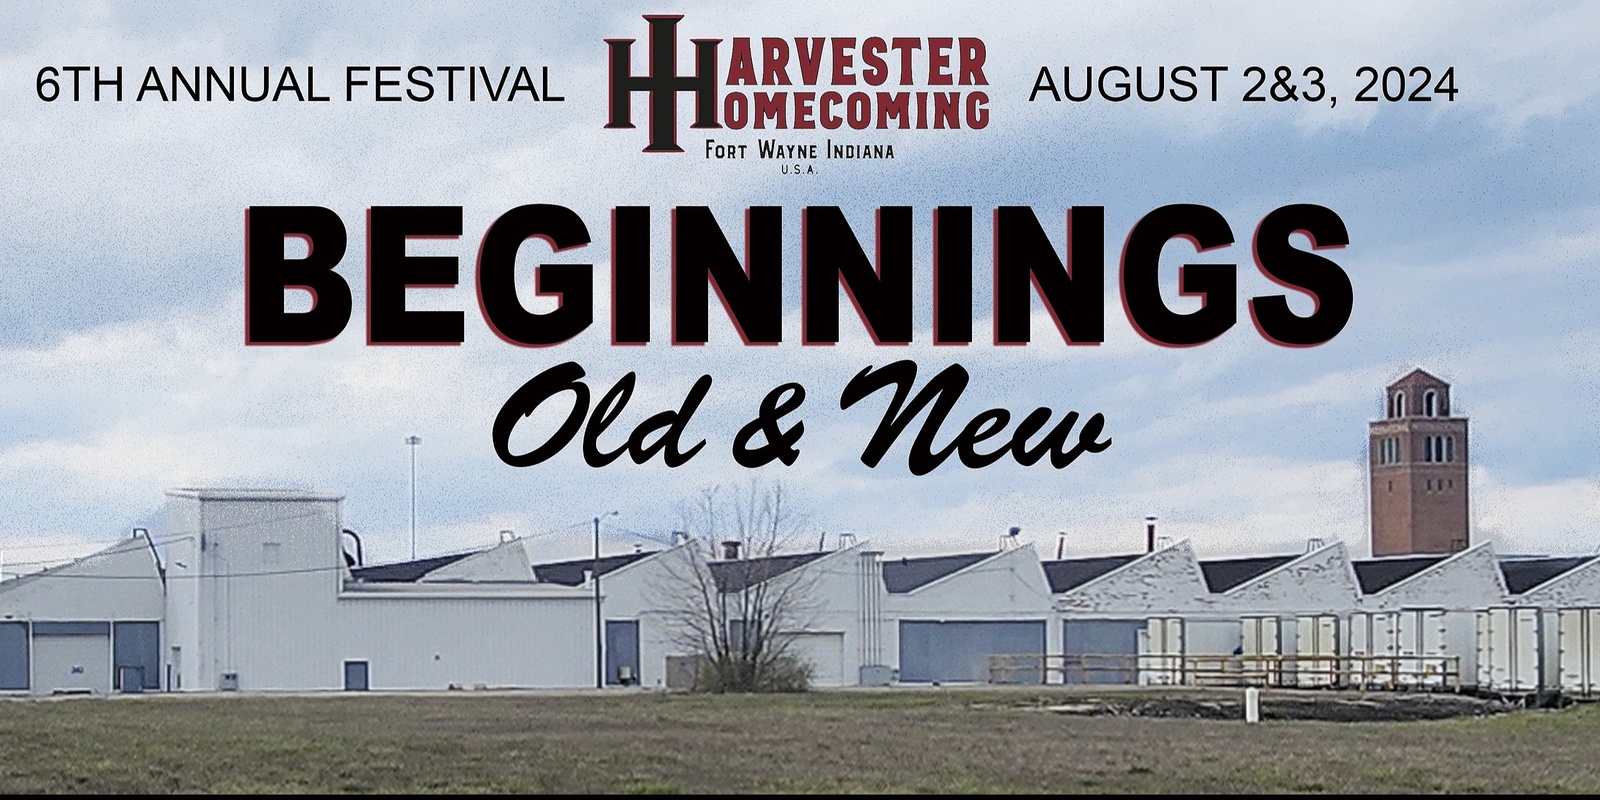 Banner image for 6th Annual Harvester Homecoming Festival